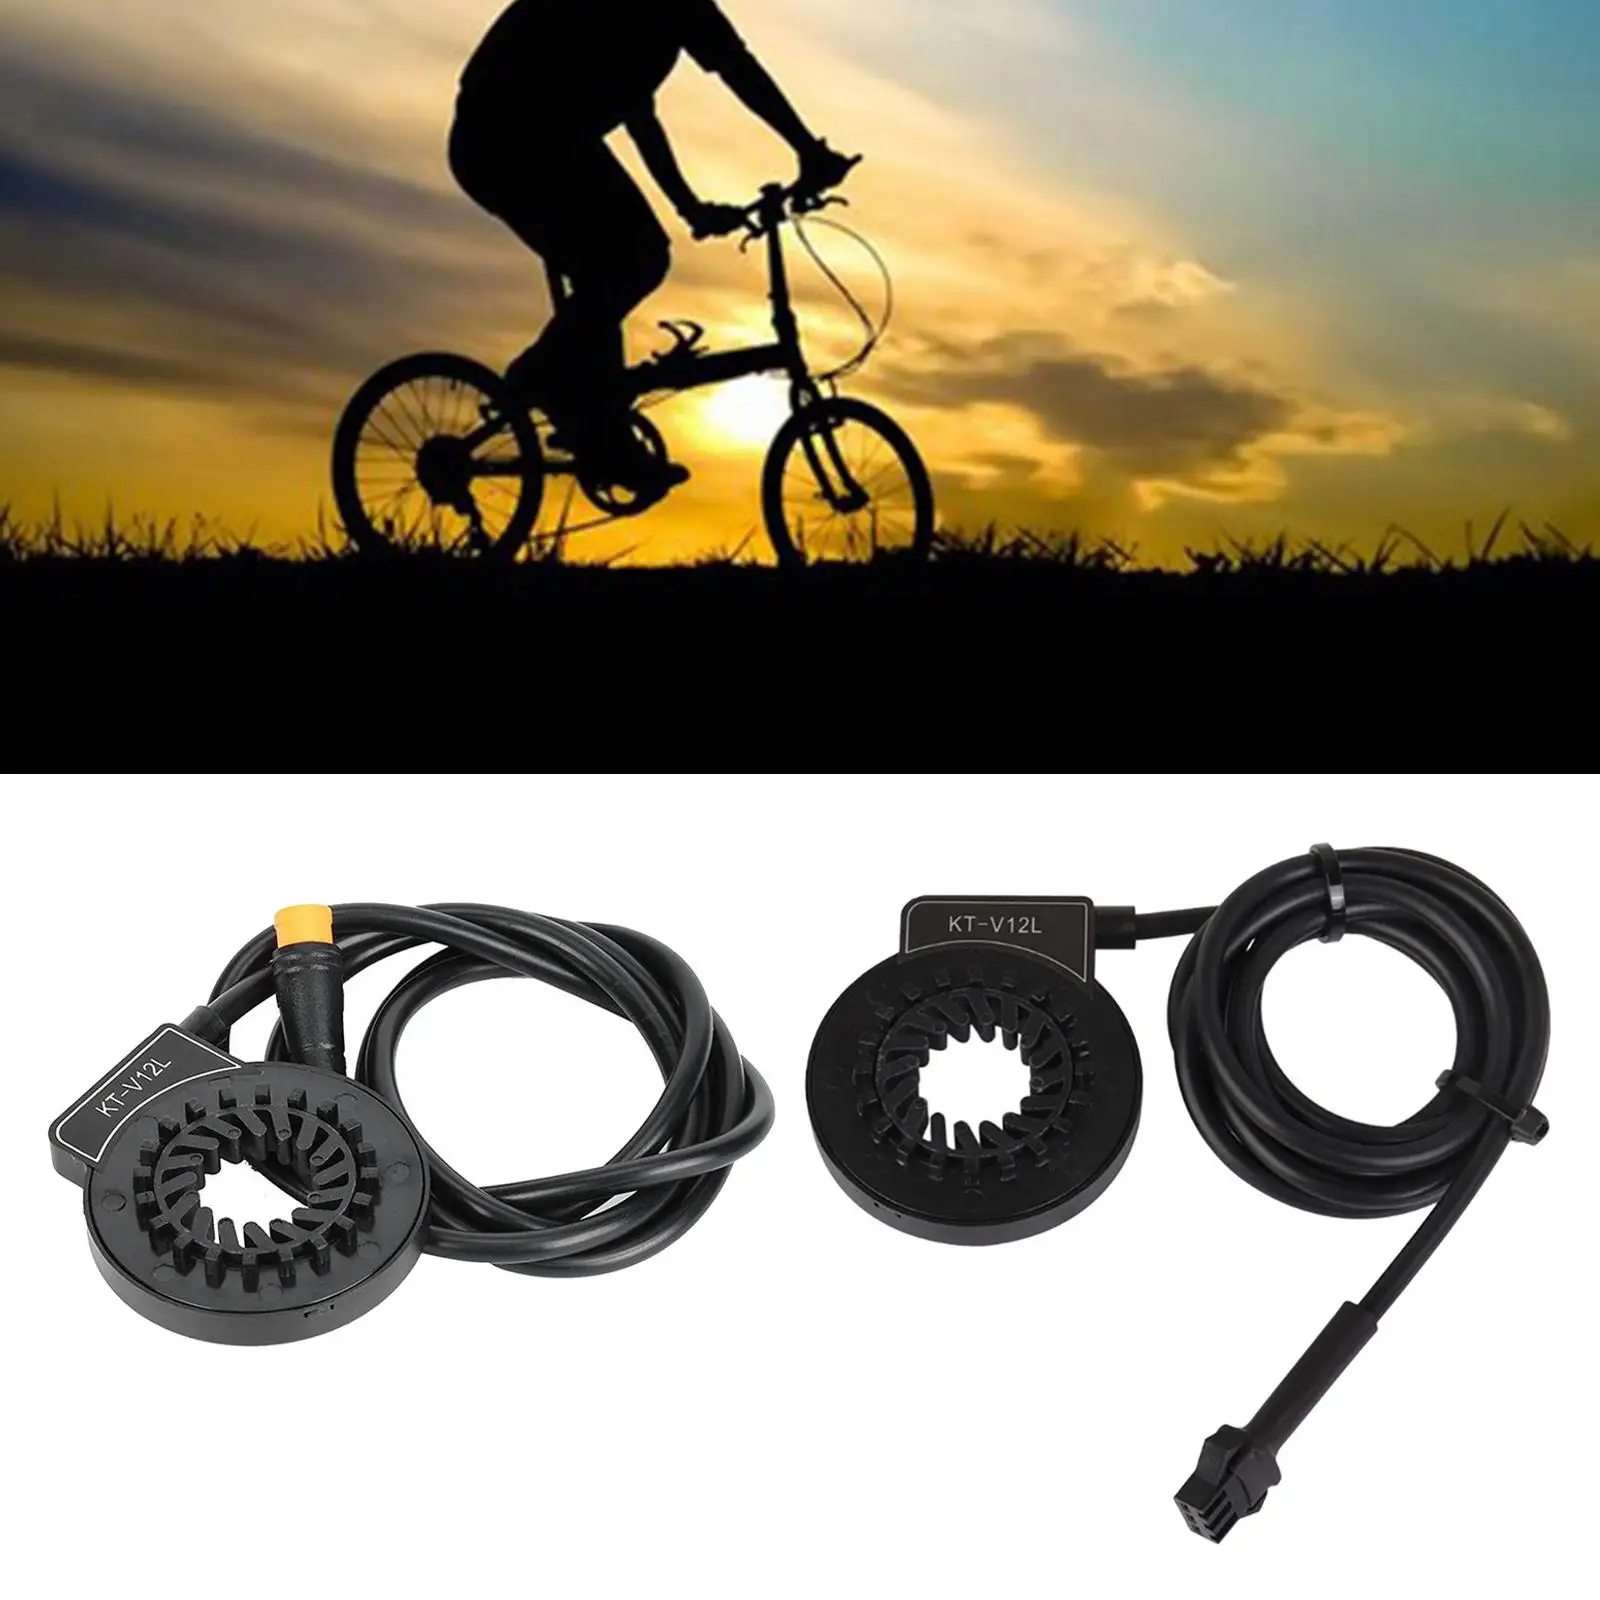 E-bike Pedal Magnets Electric Bicycle System Assistant Sensor Speed Sensor Black Color Easy to Install